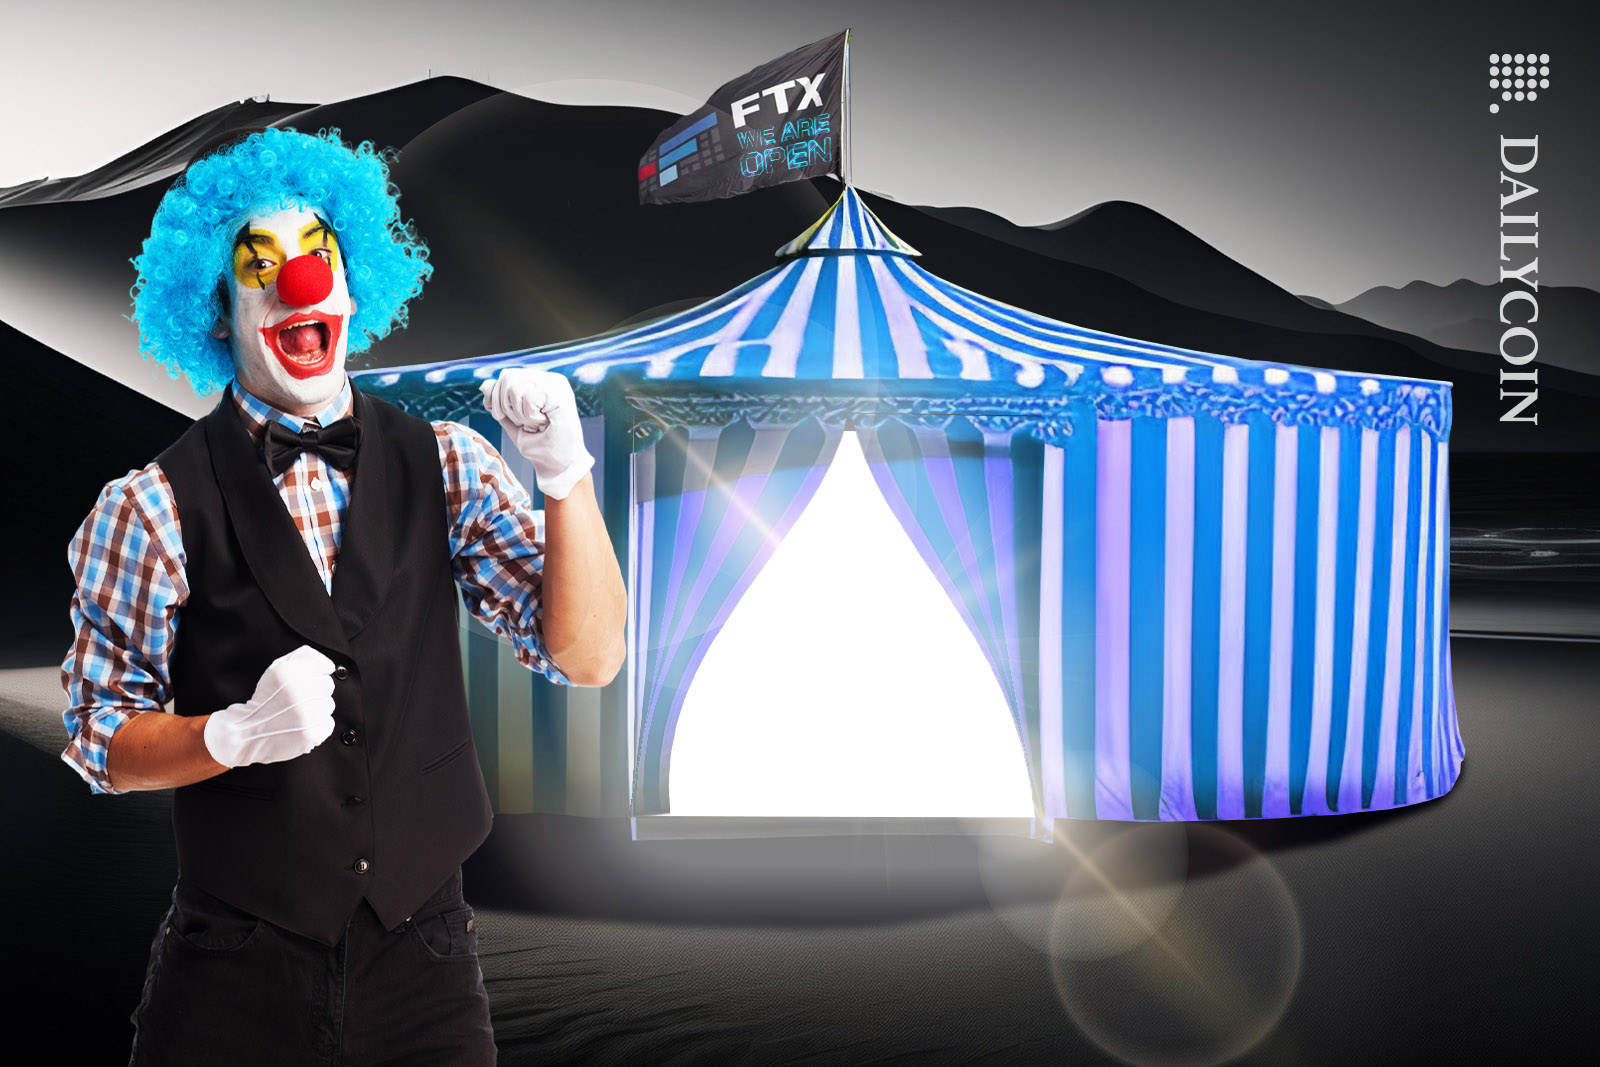 A blue haired clown advertising that the FTX circus is open again.